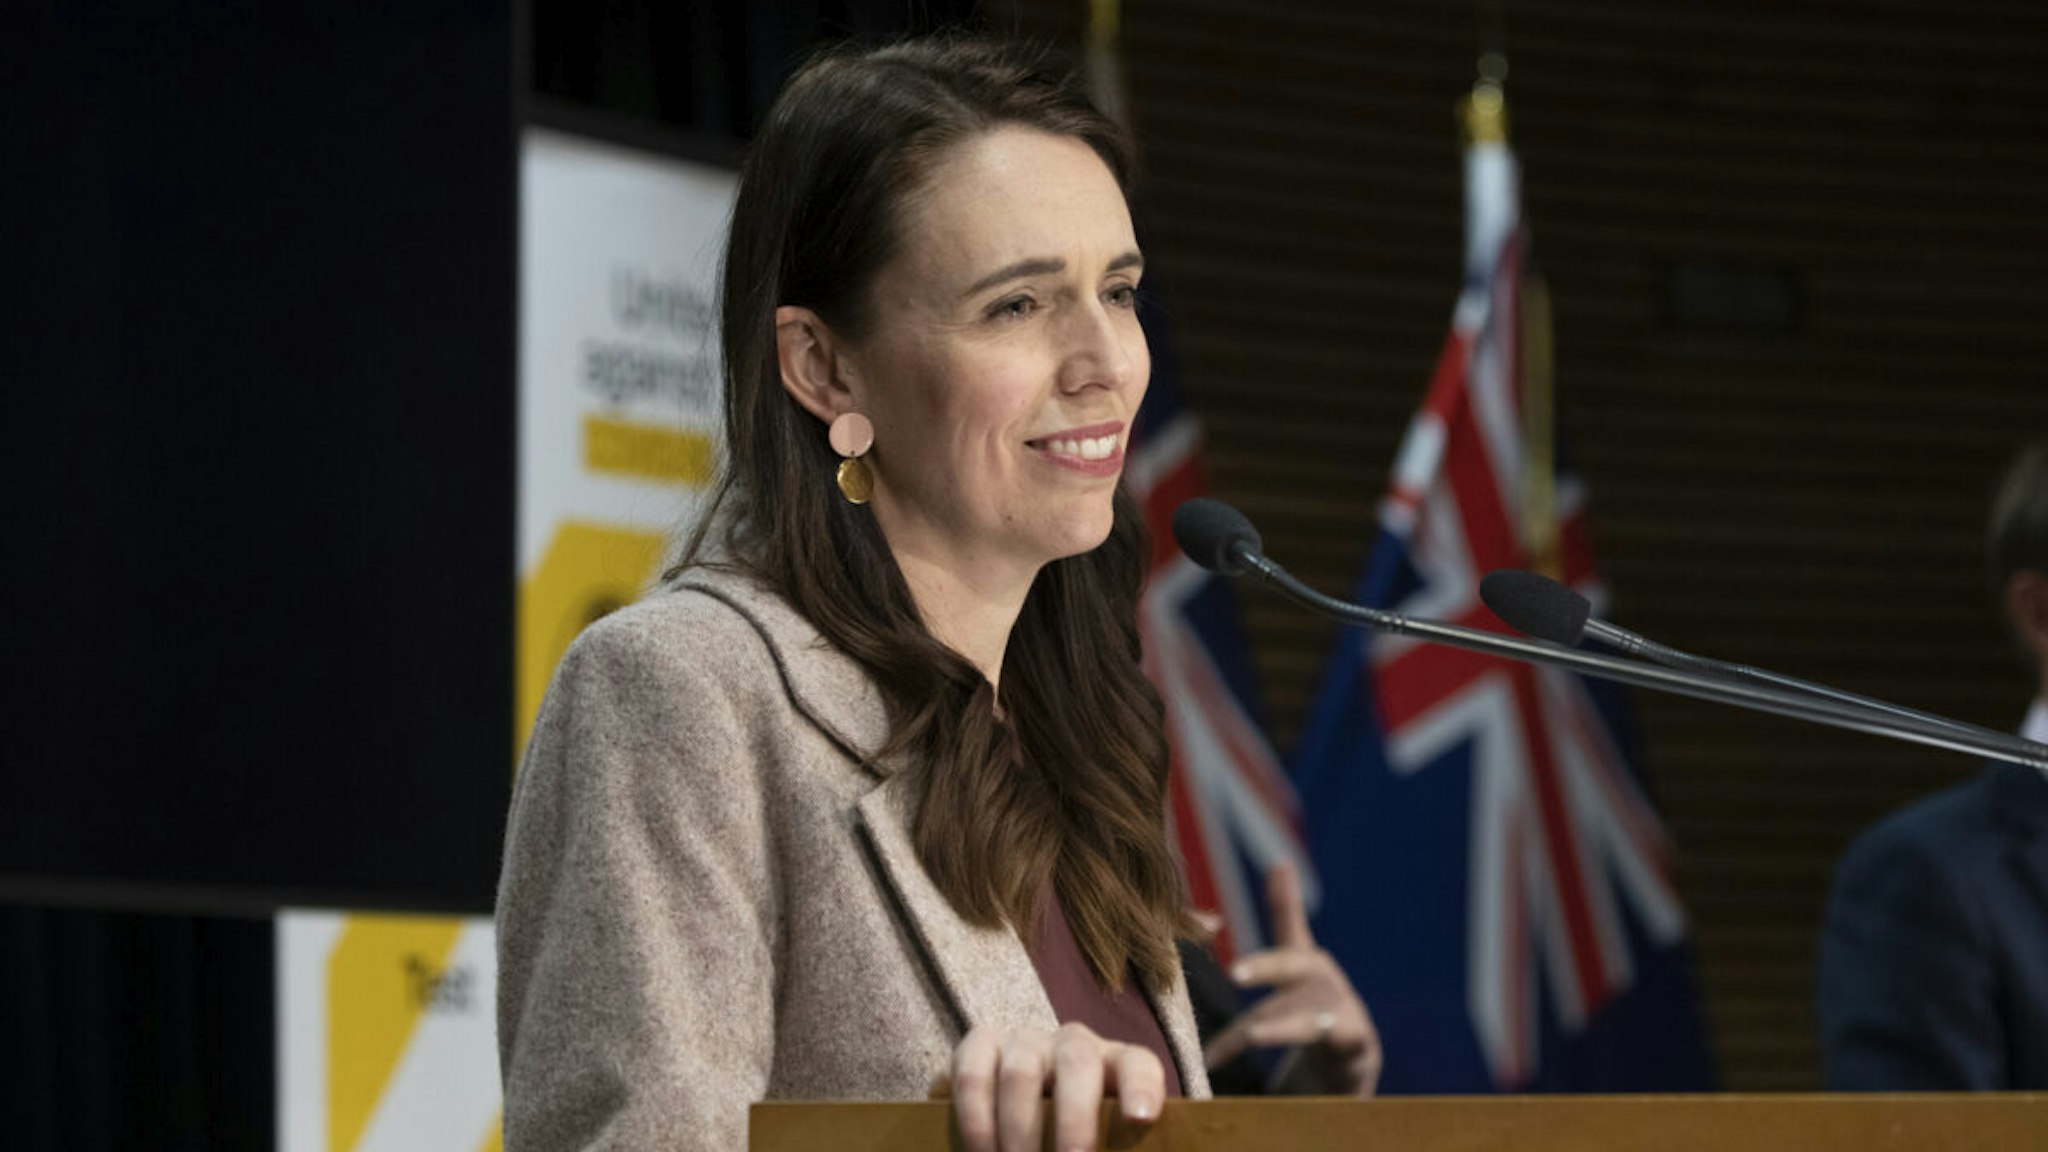 Prime Minister Jacinda Ardern speaks during the post-Cabinet press conference at the Beehive on November 1, 2021 in Wellington, New Zealand.